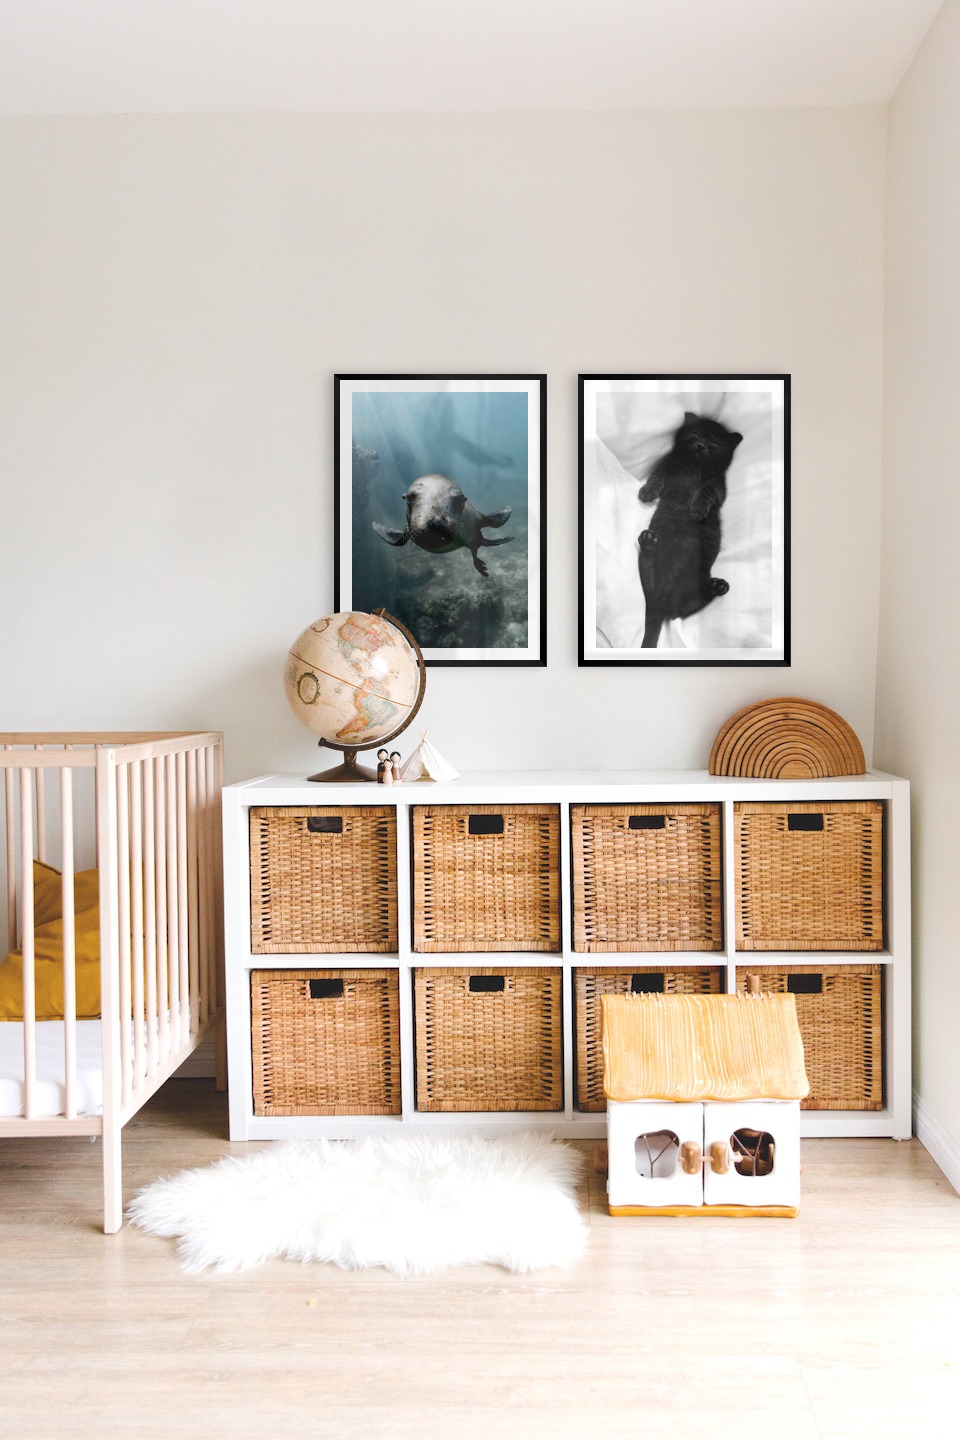 Gallery wall with picture frames in black in sizes 50x70 with prints "Seal in the water" and "Cat in bed"